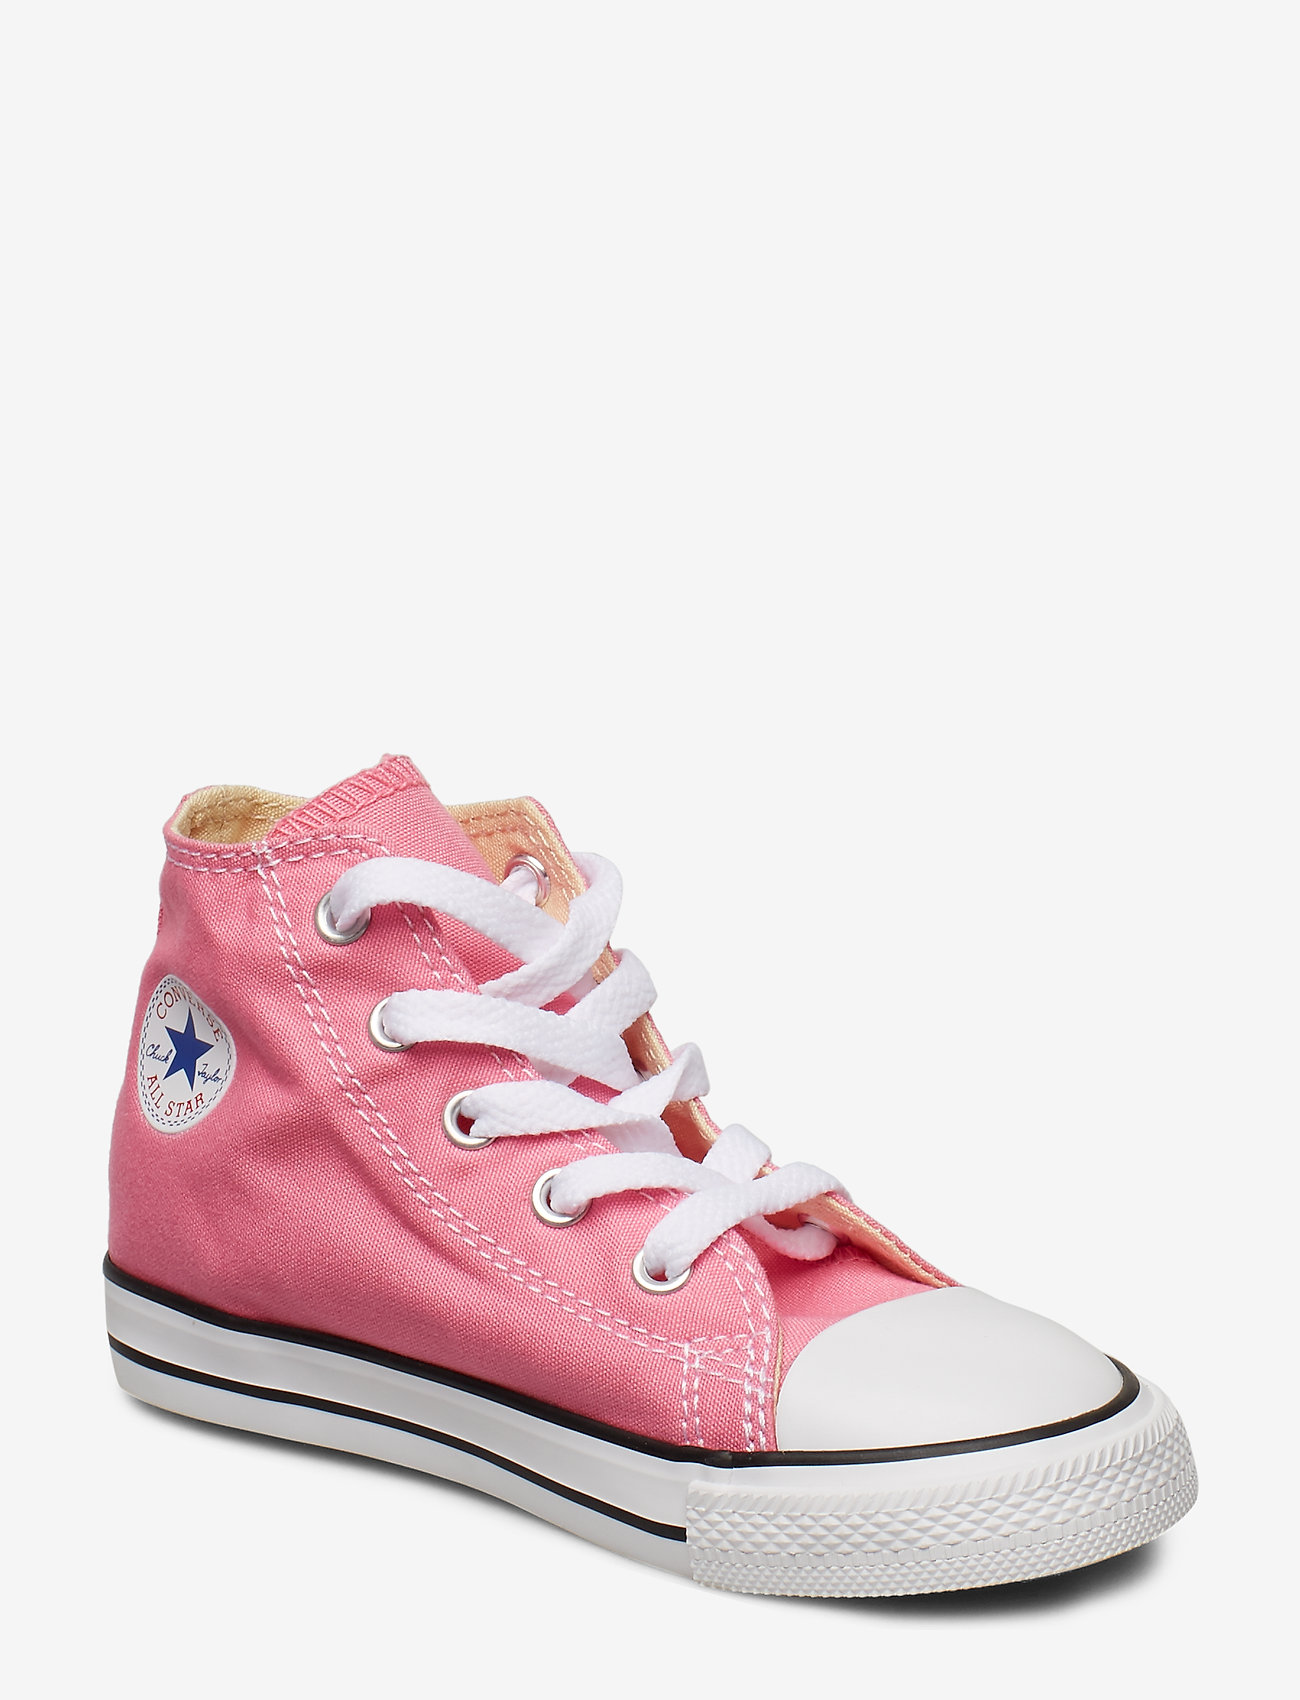 Converse - Chuck Taylor All Star - lapset - pink - 0